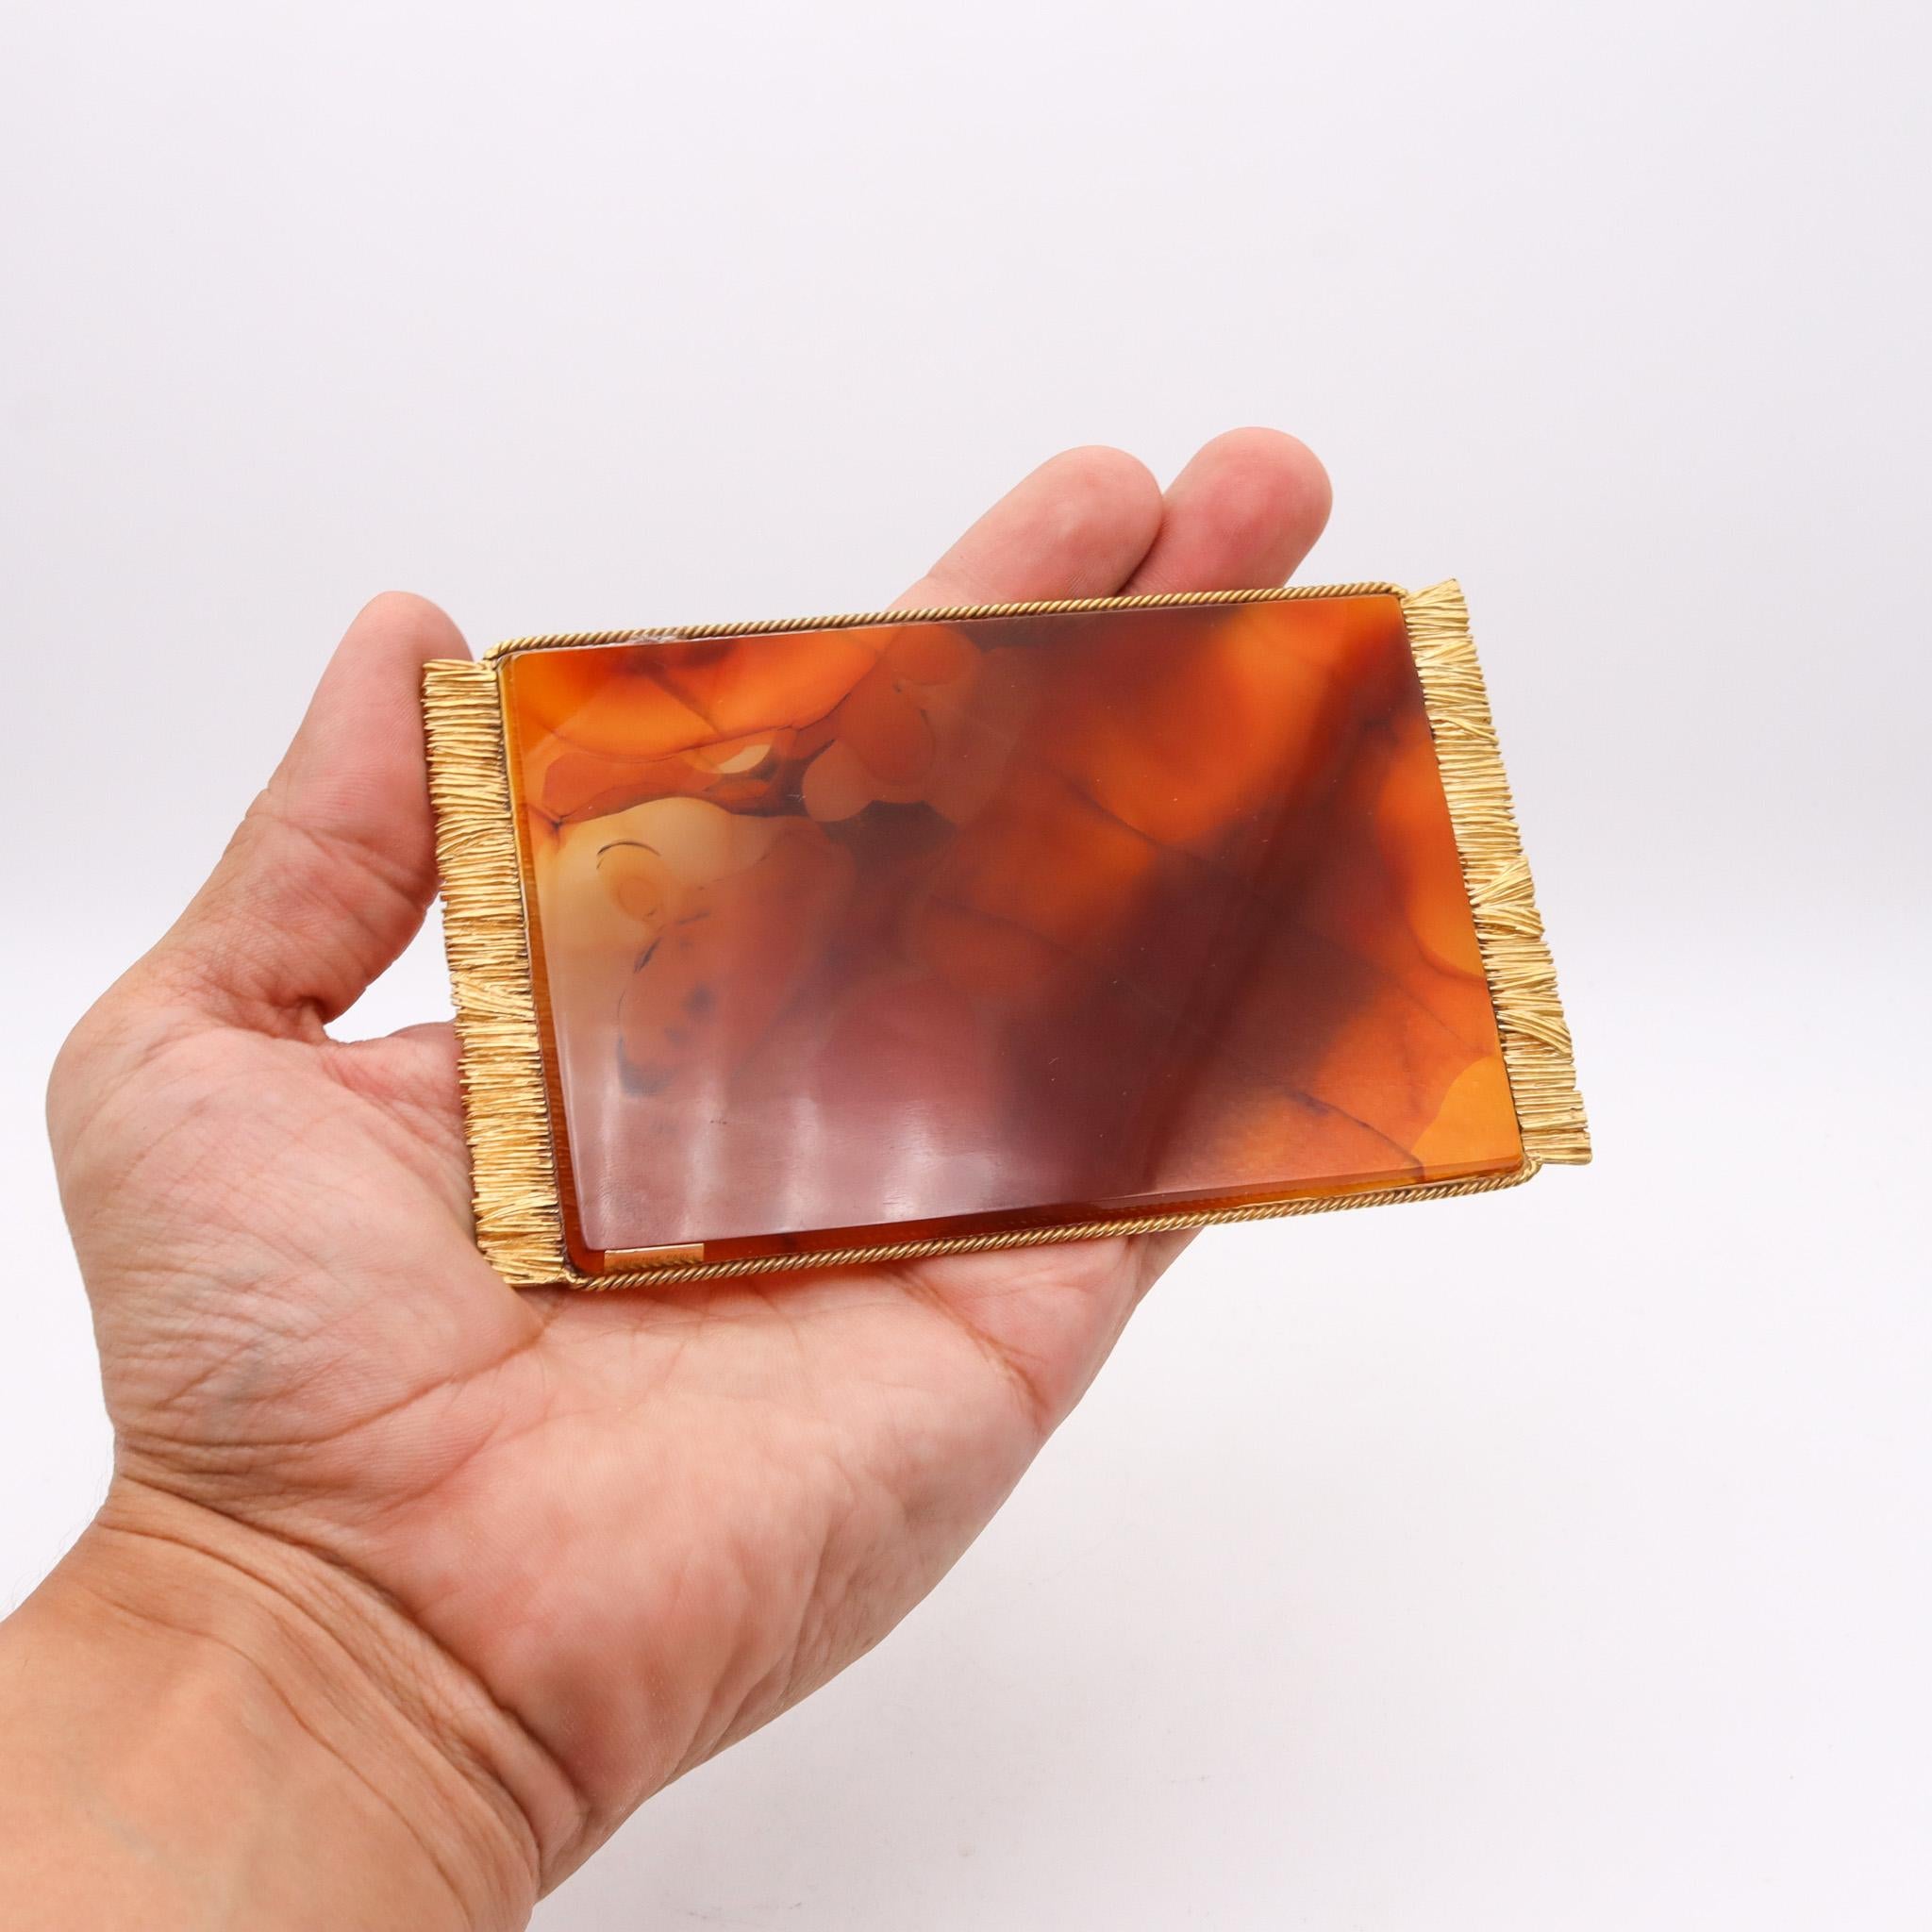 Early 20th Century Marchak Paris 1920 Art Deco Translucent Agate Desk Tray In Gilt Sterling Silver For Sale